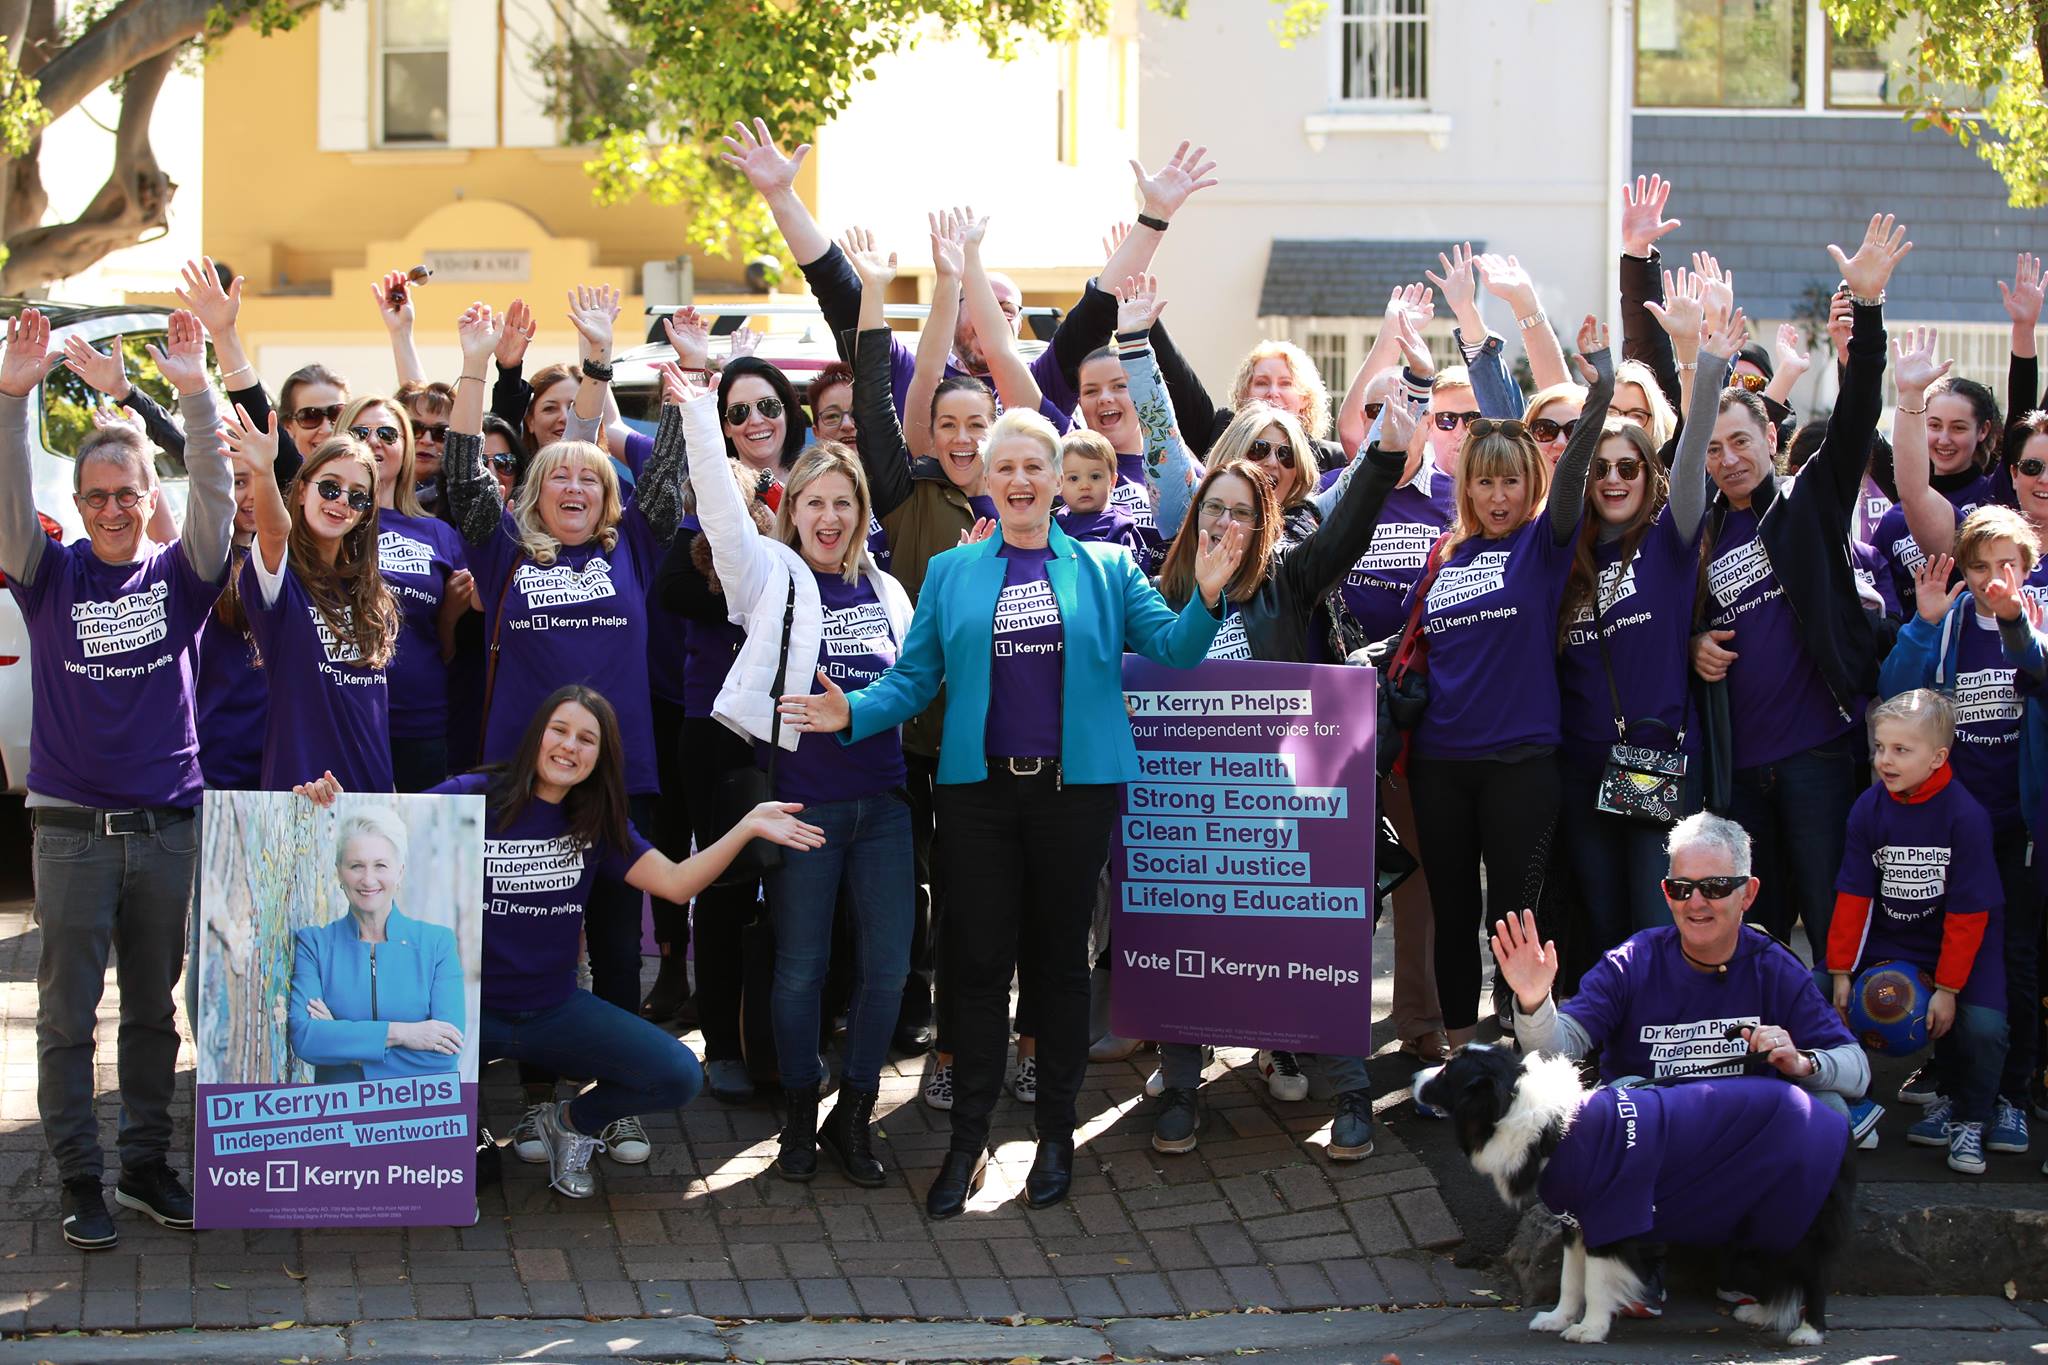 Kerryn Phelps ousts Liberal Party in historic Wentworth by-election victory